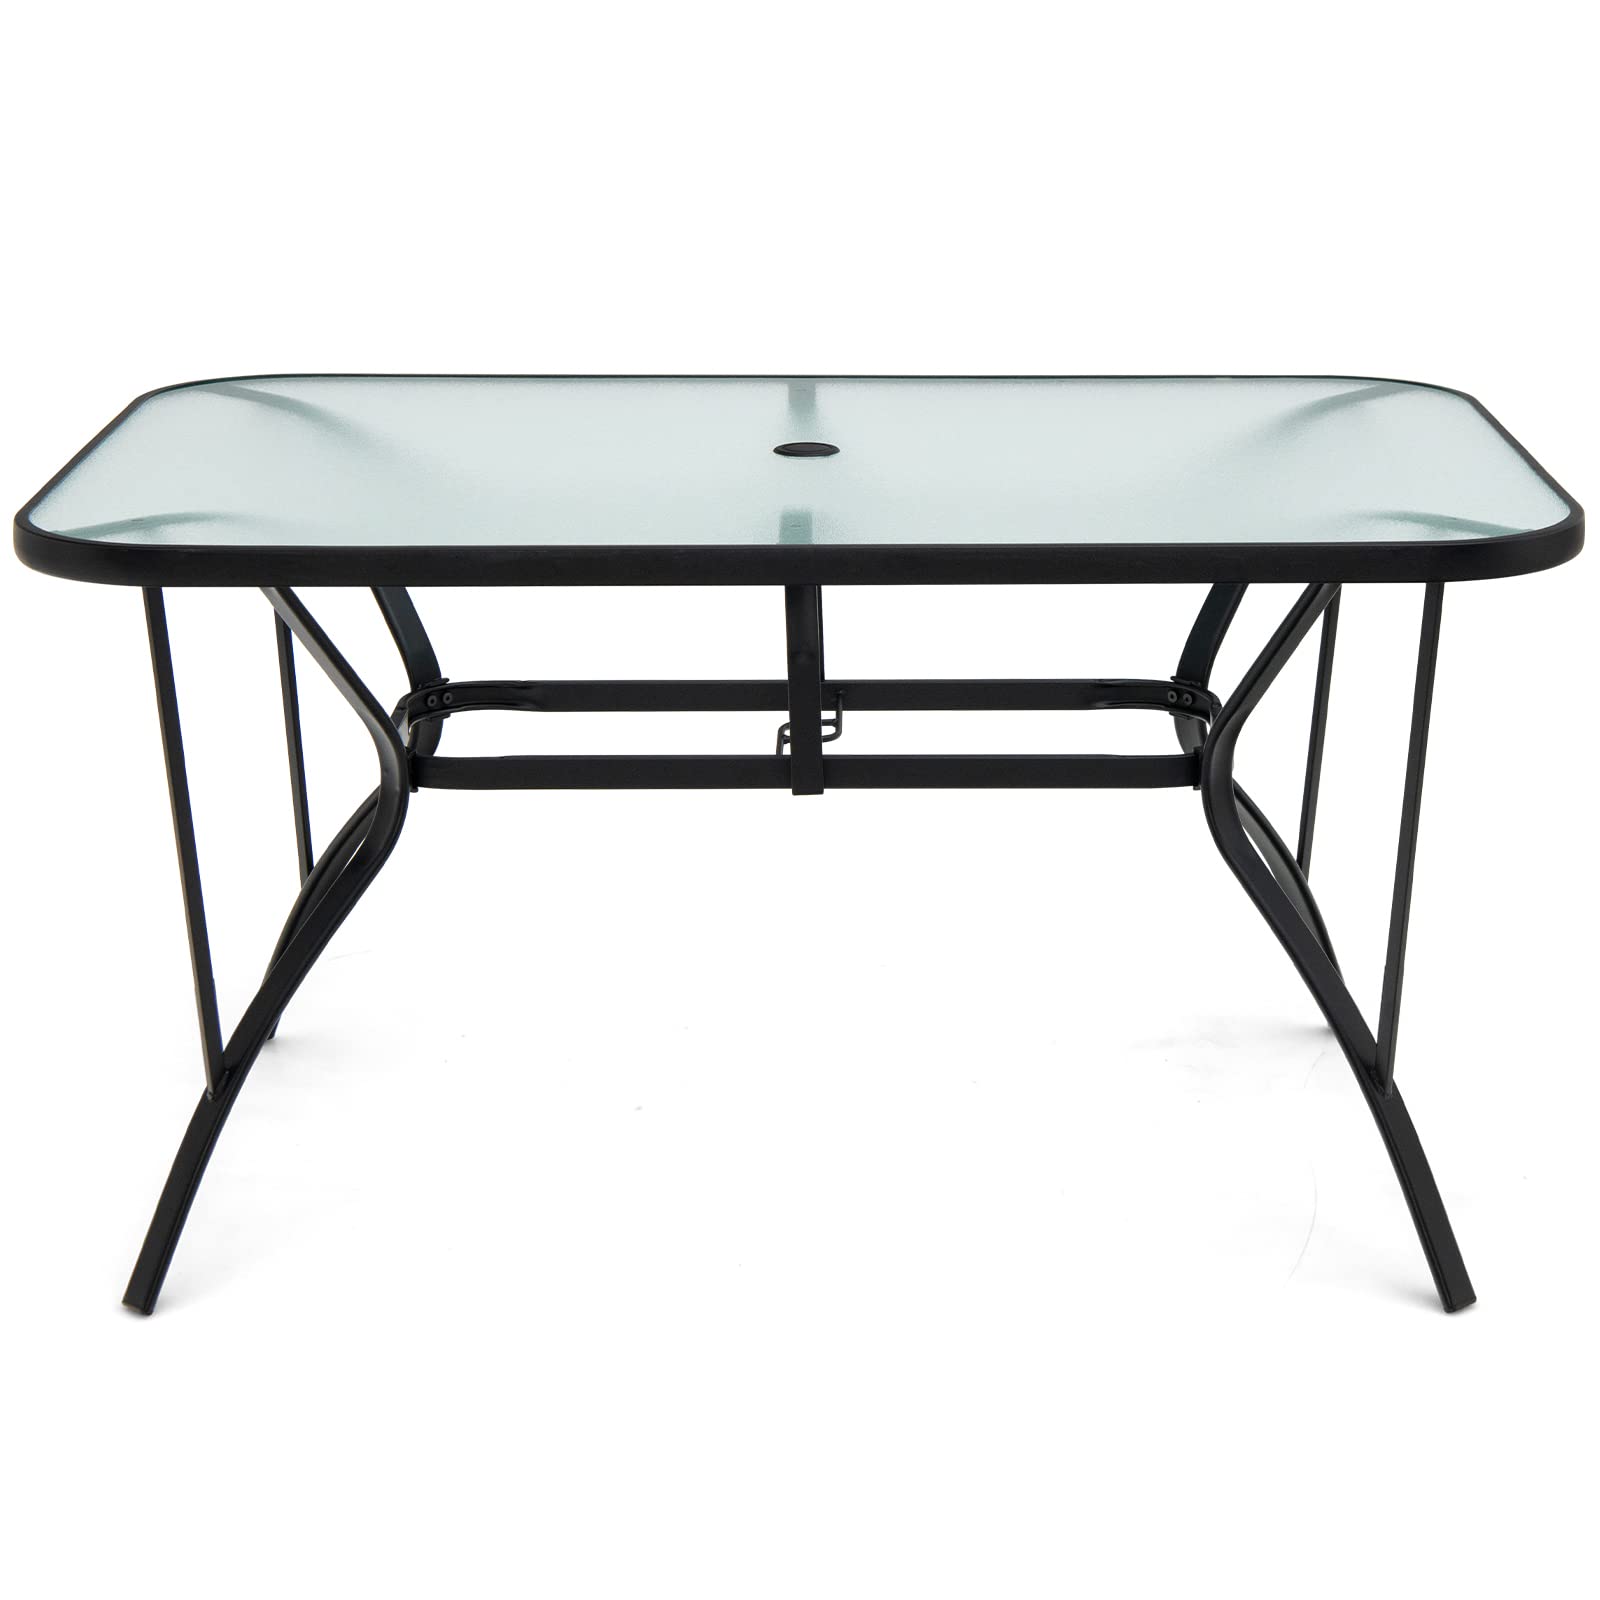 Giantex Patio Dining Table for for 4-6 Person